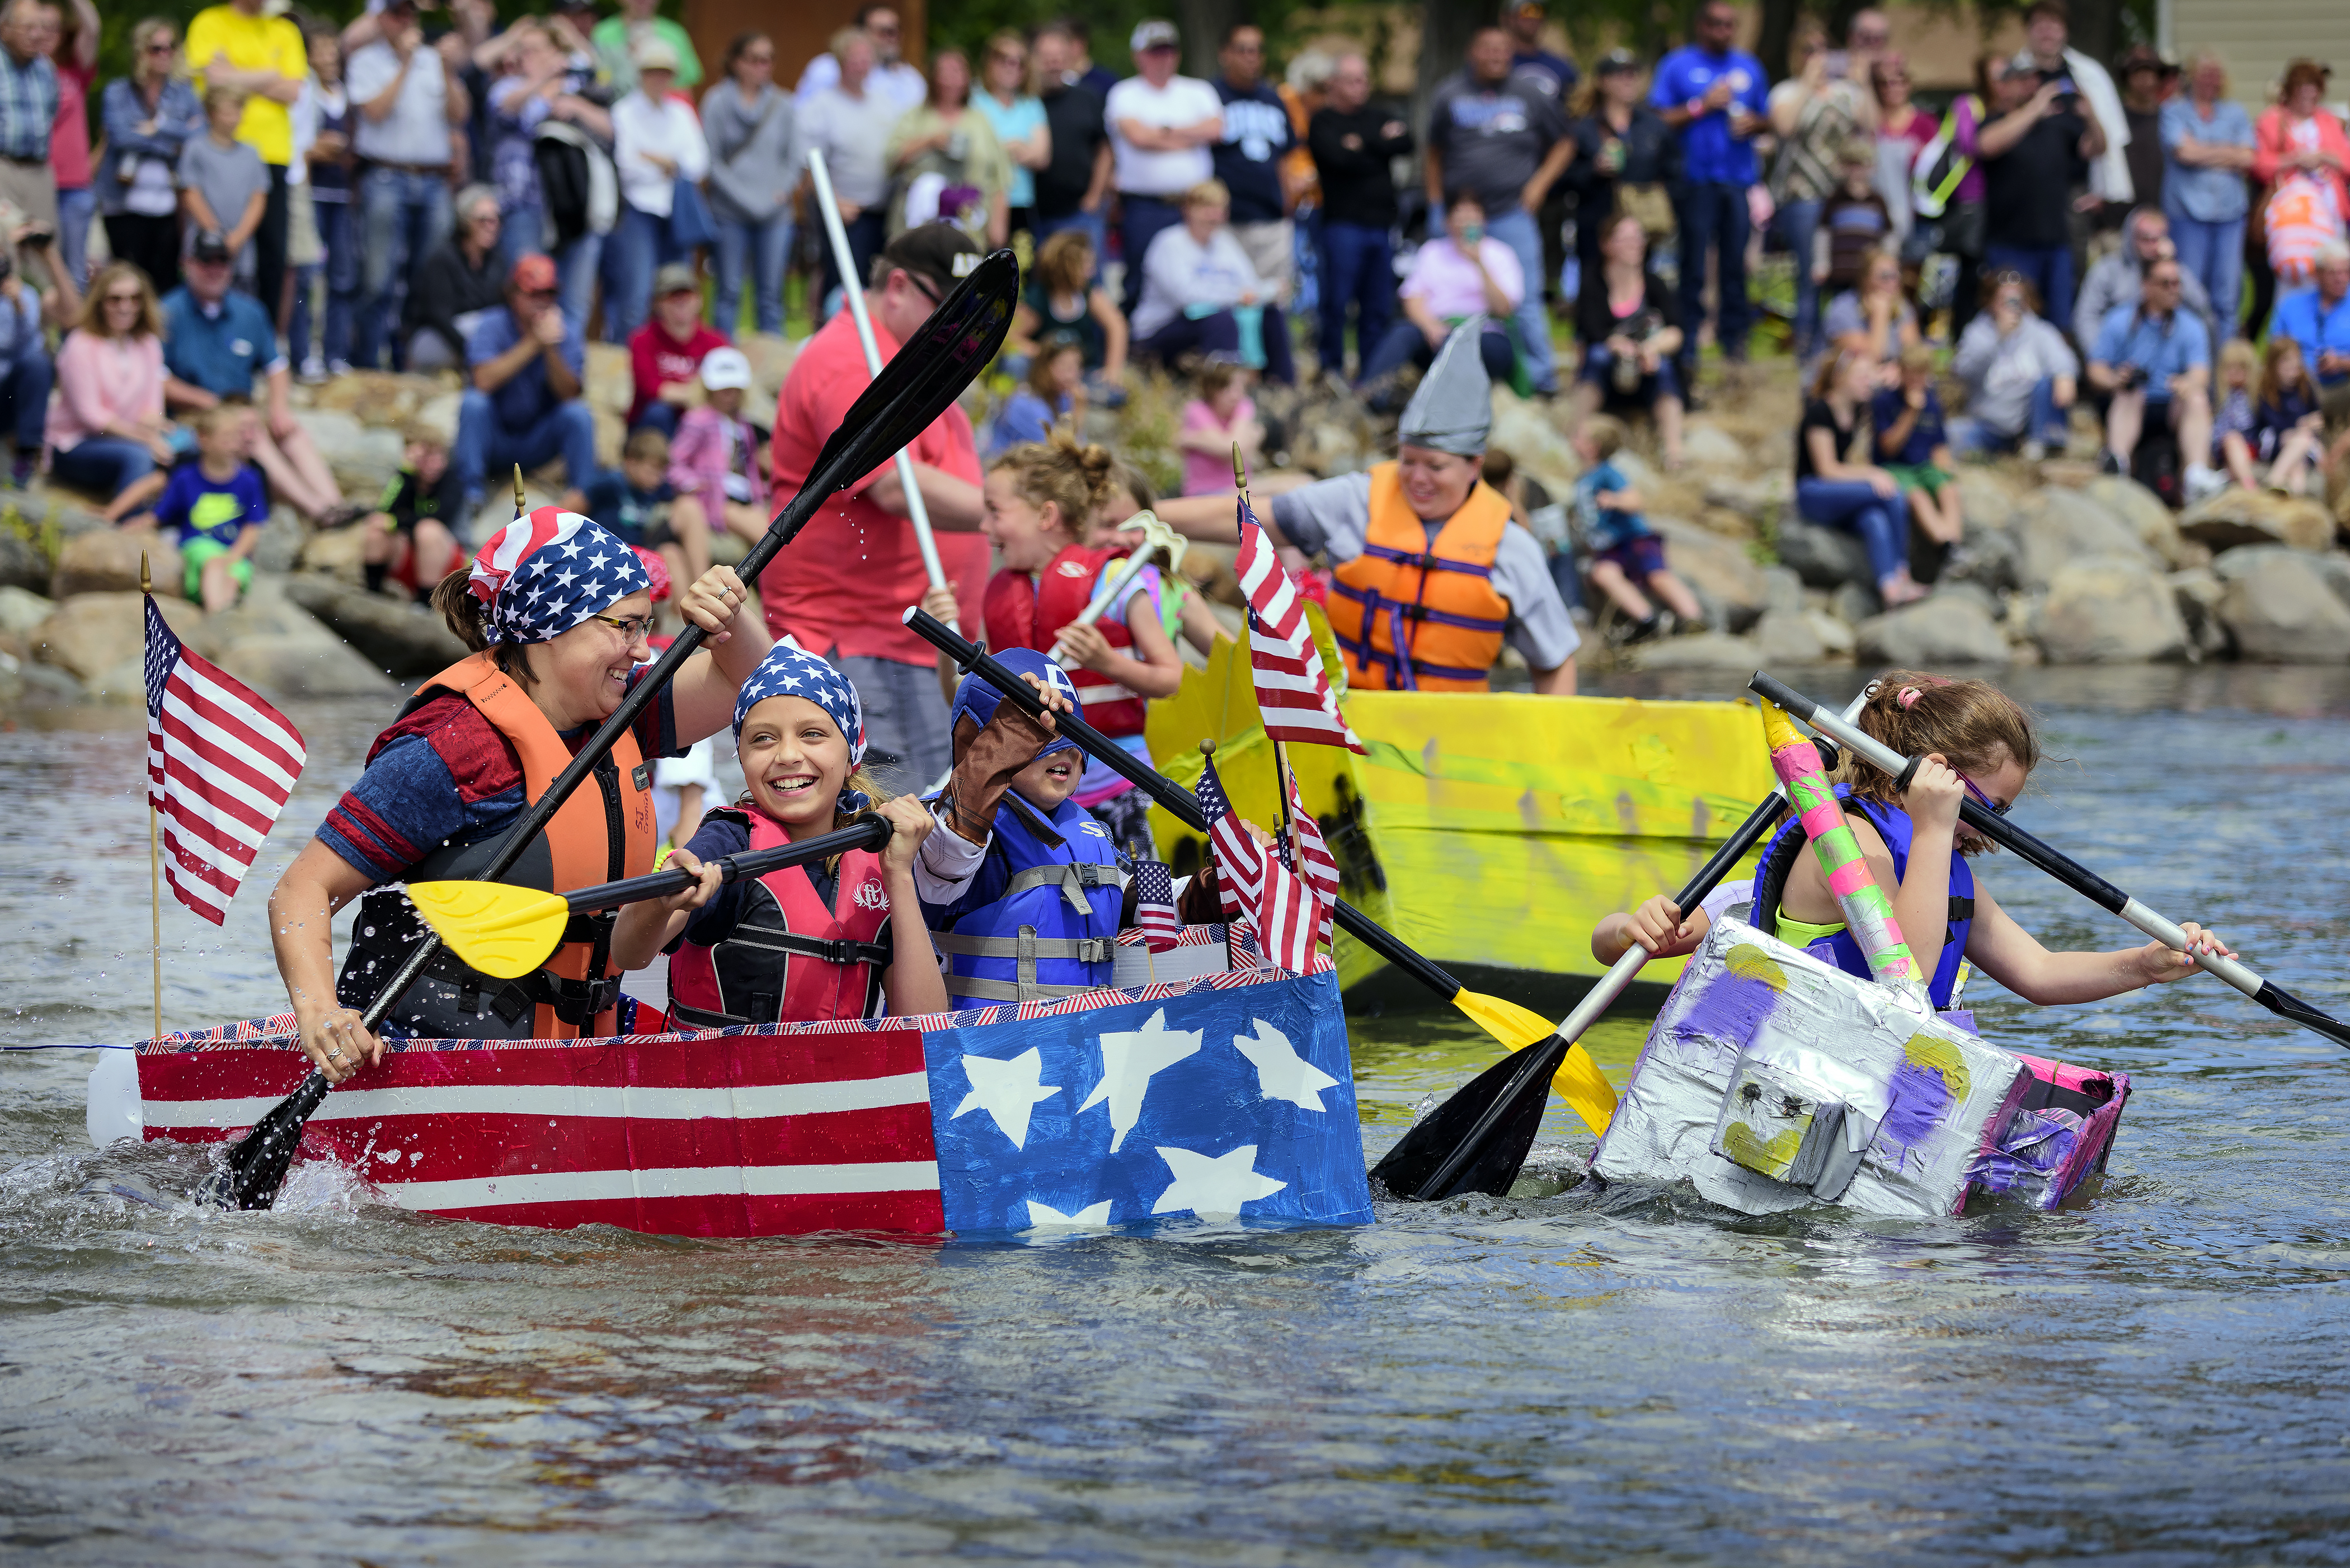 People rowing an American flag themed cardboard boat at Oahe Days in South Dakota